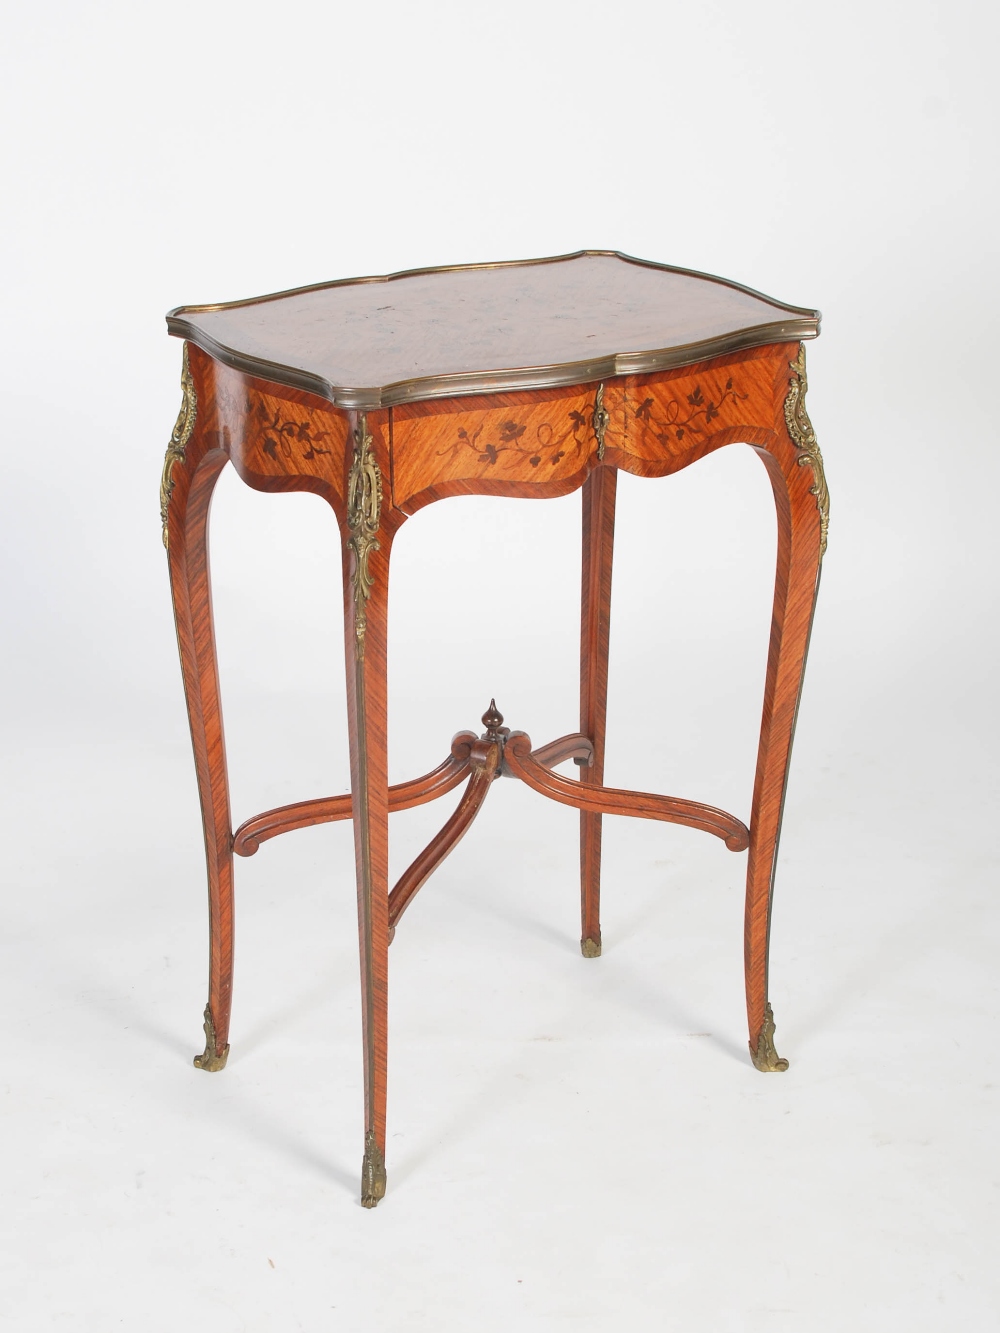 A late 19th century French kingwood, marquetry and gilt metal mounted occasional table, the shaped